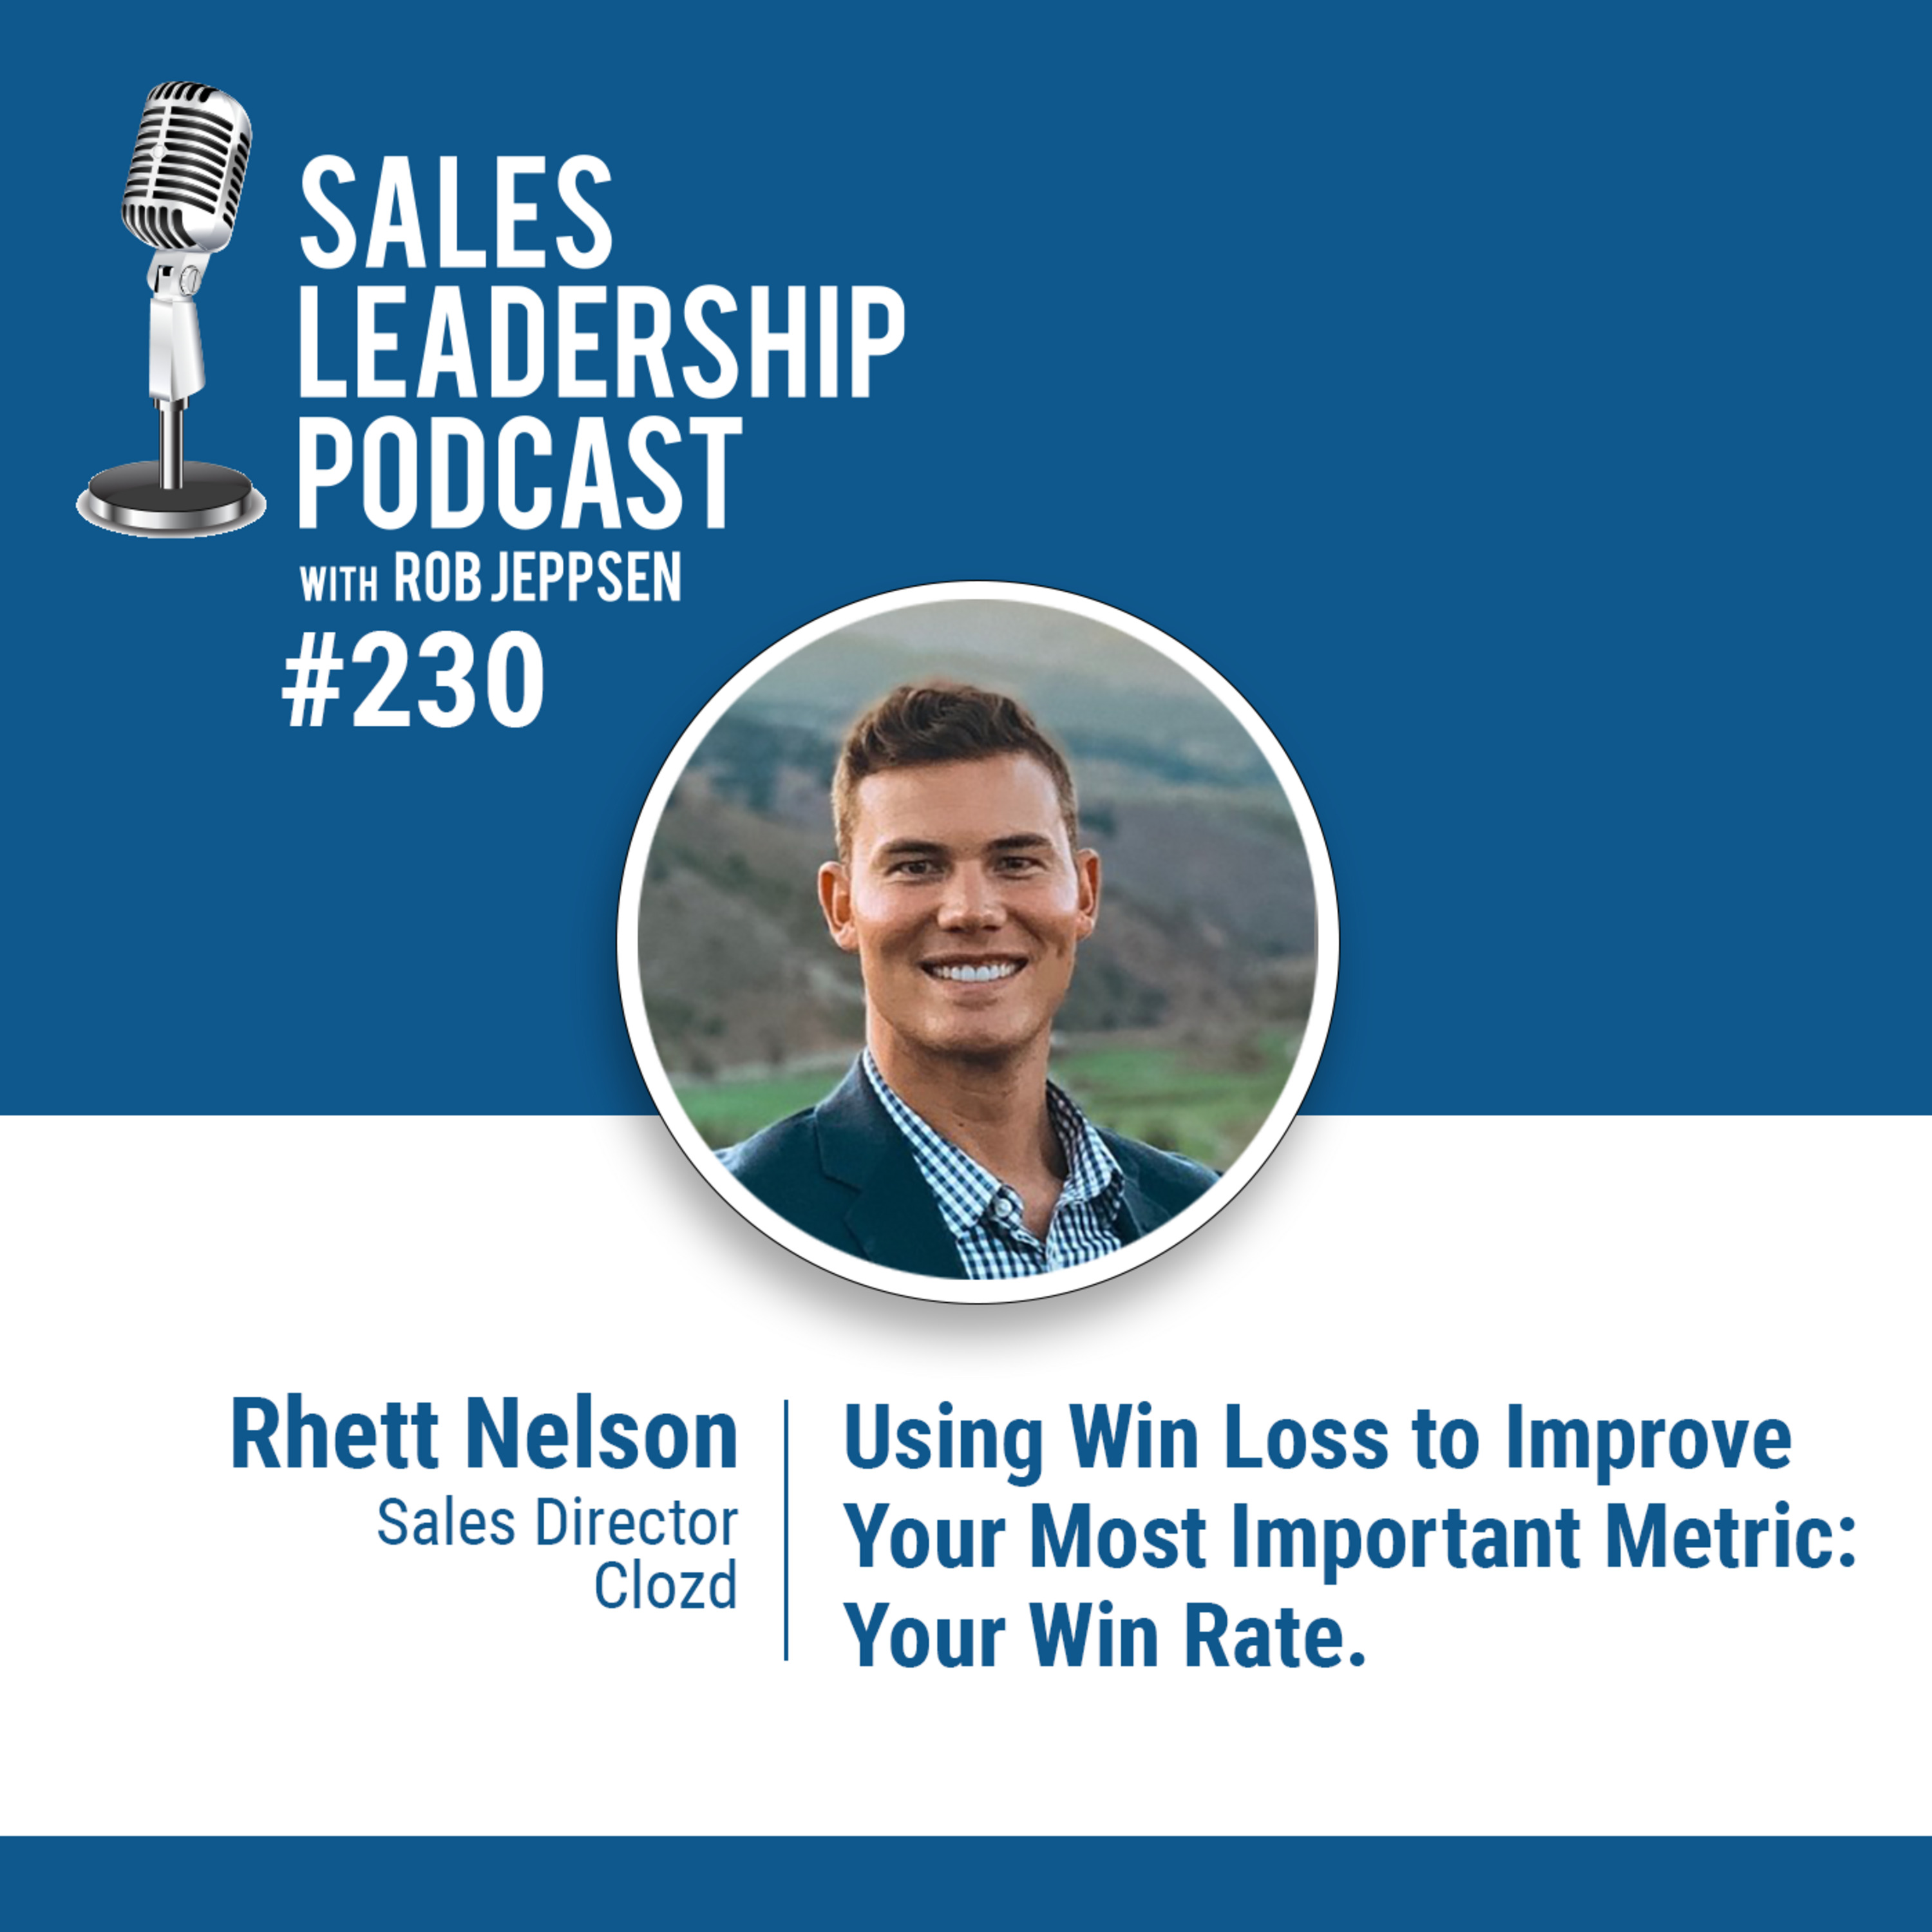 Episode 231: Rhett Nelson, Sales Director at Clozd - Using Win Loss to Improve Your Most Important Metric: Your Win Rate.